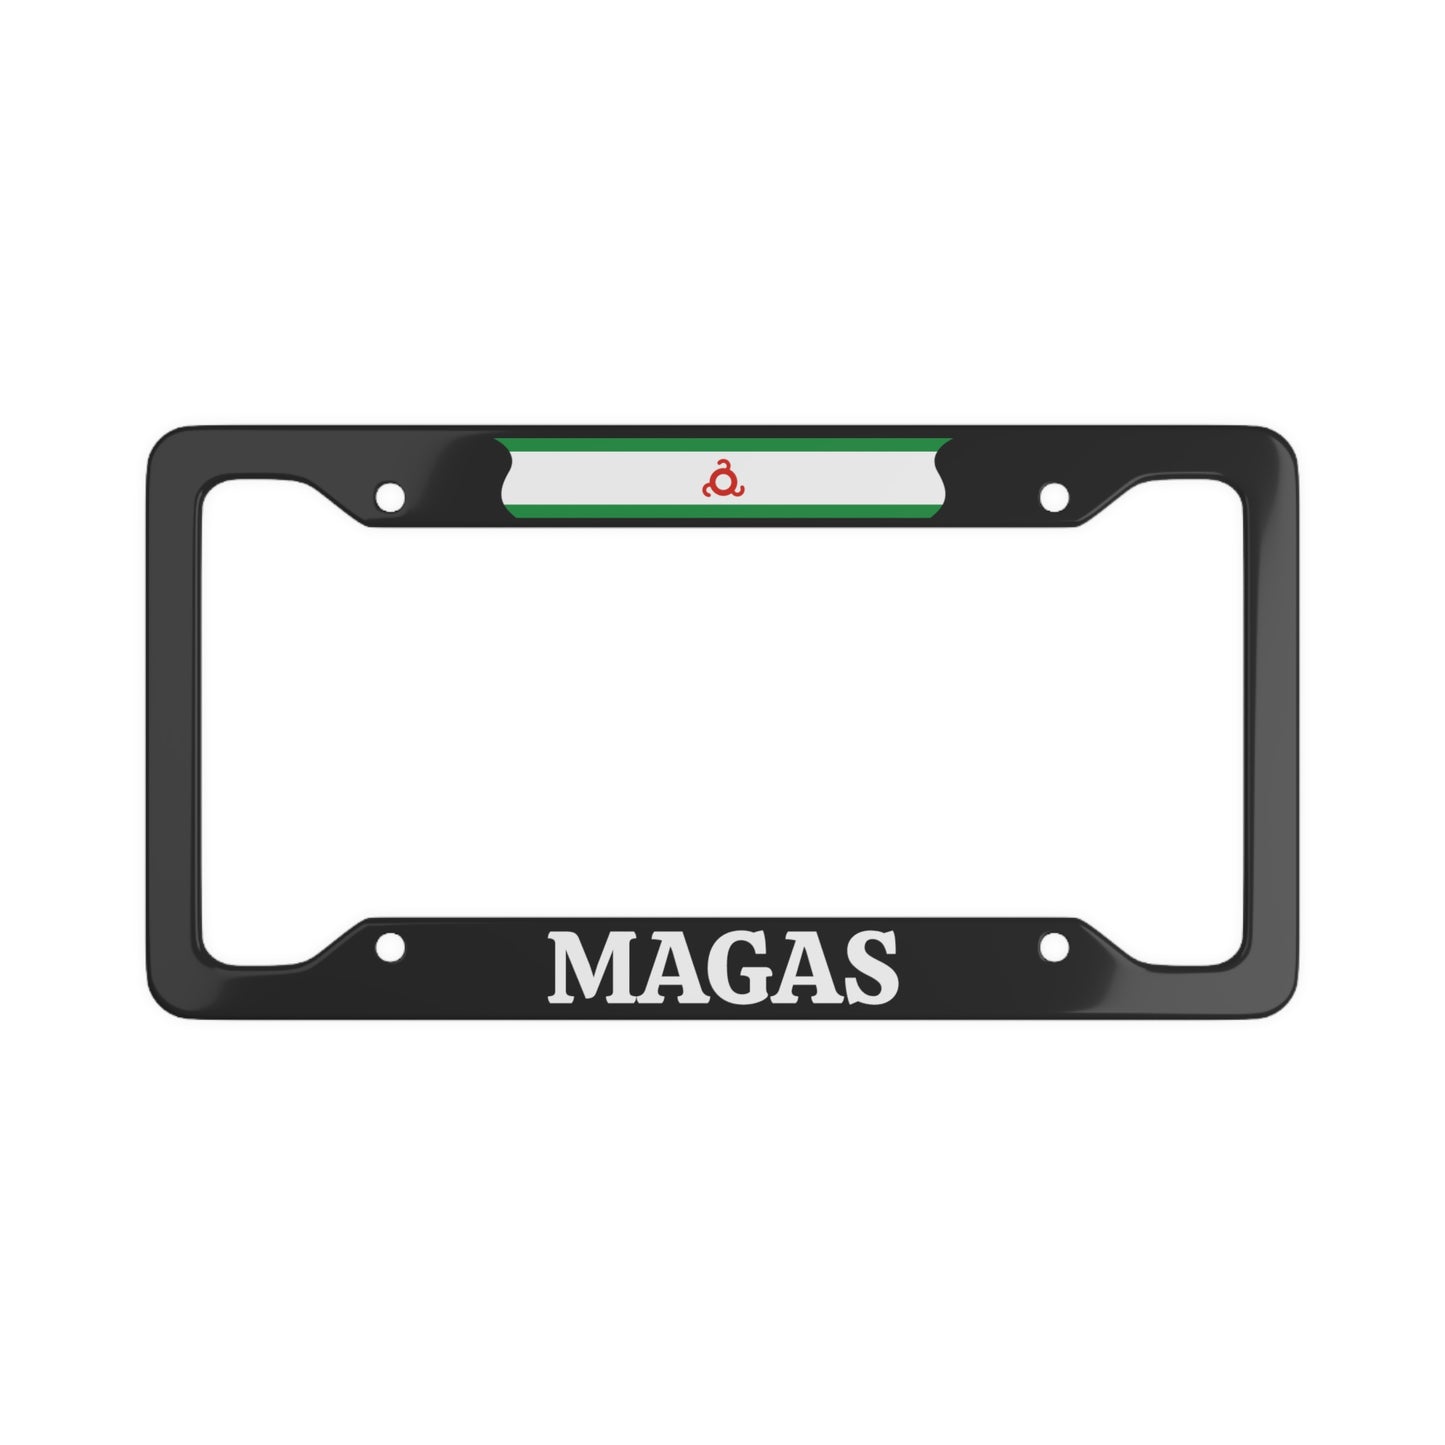 Magas License Plate Frame